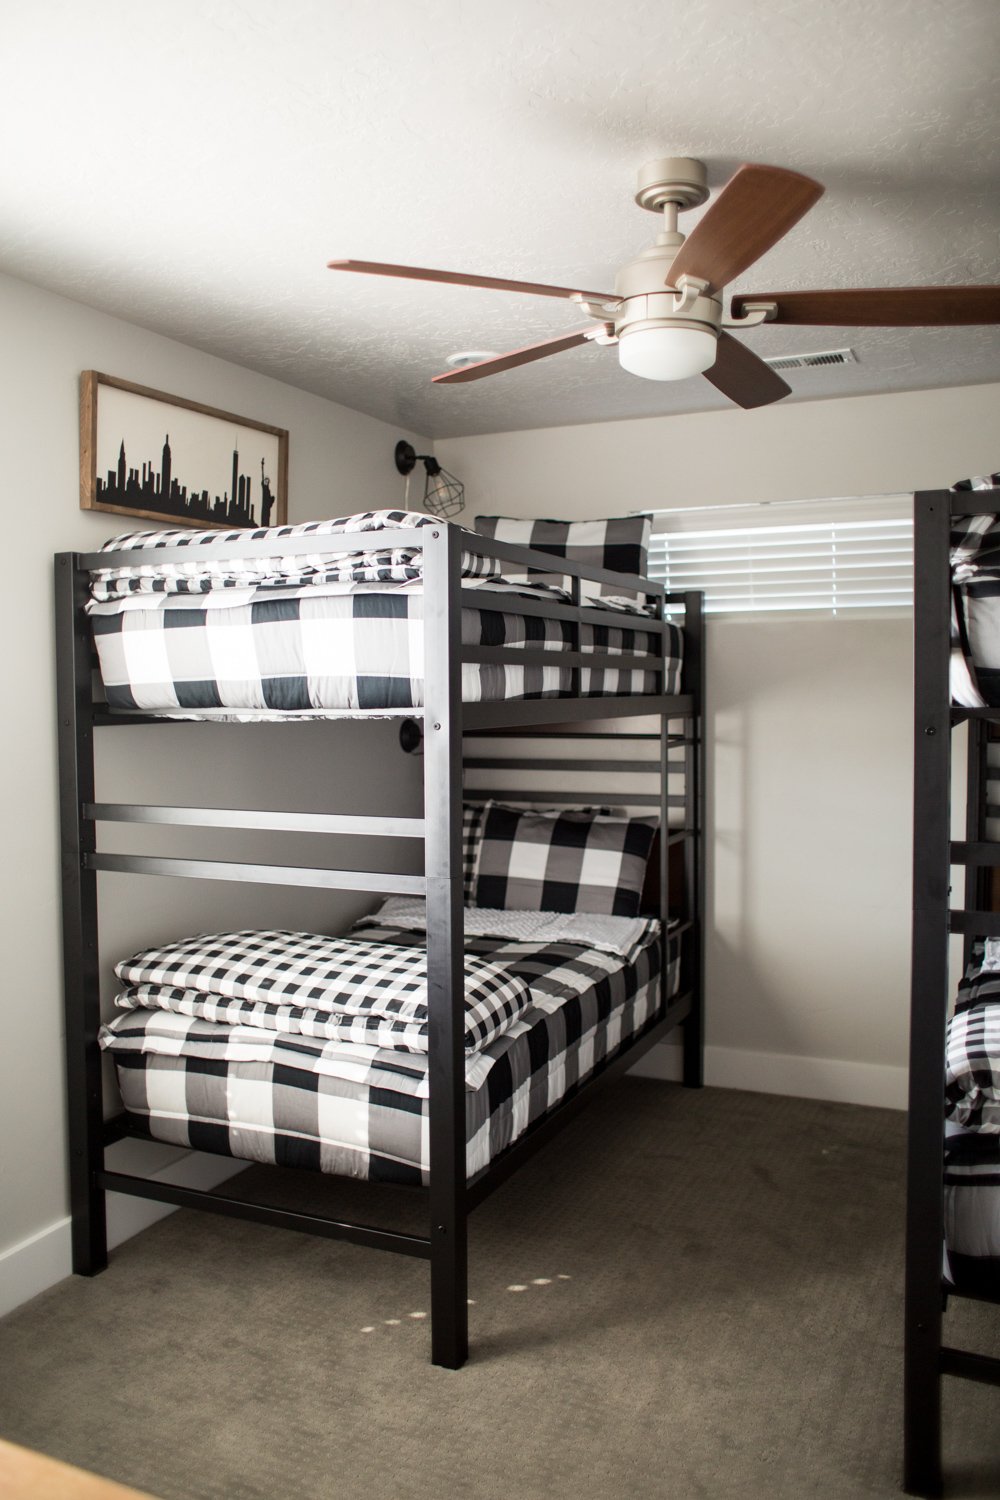 How To Make A Bunkbed In Less Than 5, Fan Solutions For Bunk Beds